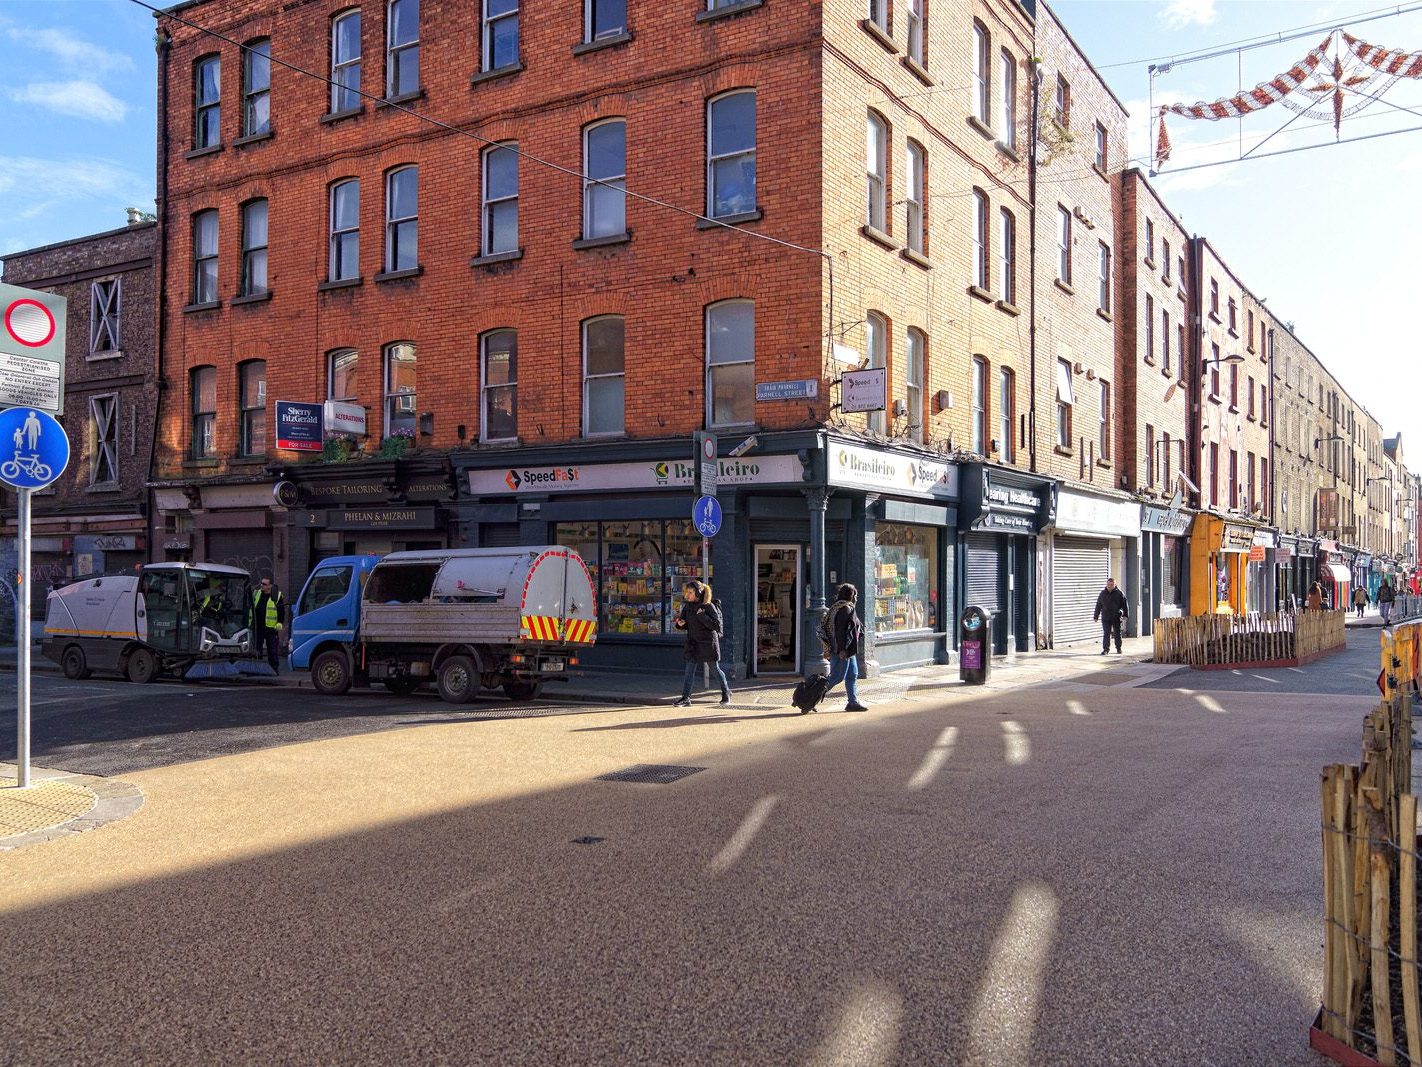 CAPEL STREET IS STILL A W.I.P. [THE PERIOD BETWEEN HALLOWEEN AND CHRISTMAS]-224787-1